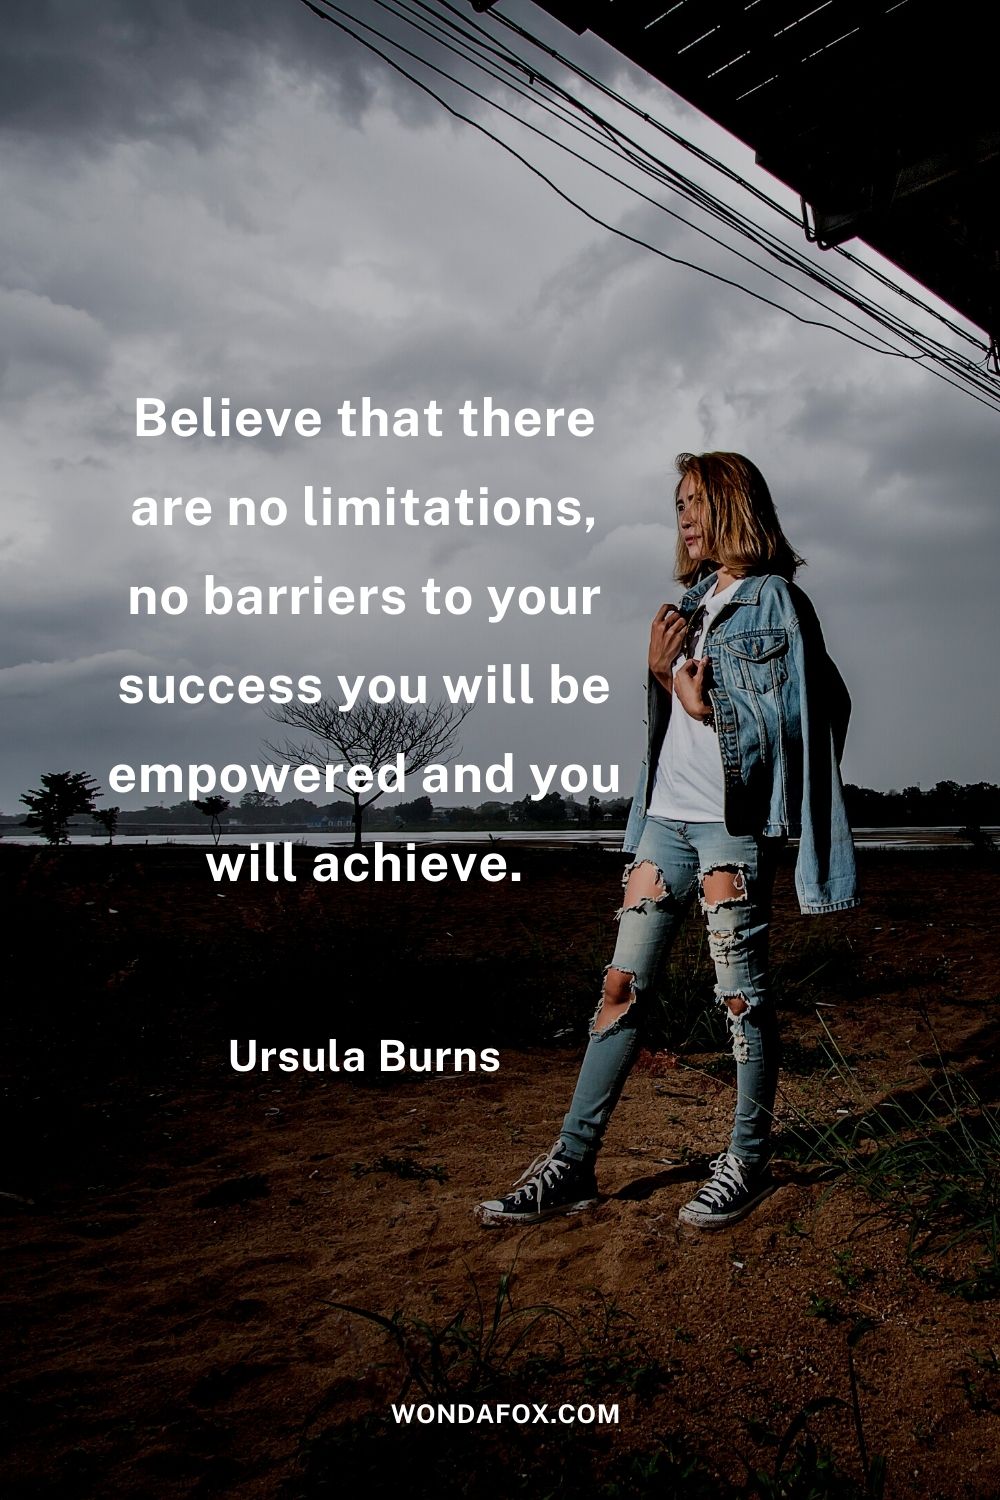 Believe that there are no limitations, no barriers to your success you will be empowered and you will achieve.